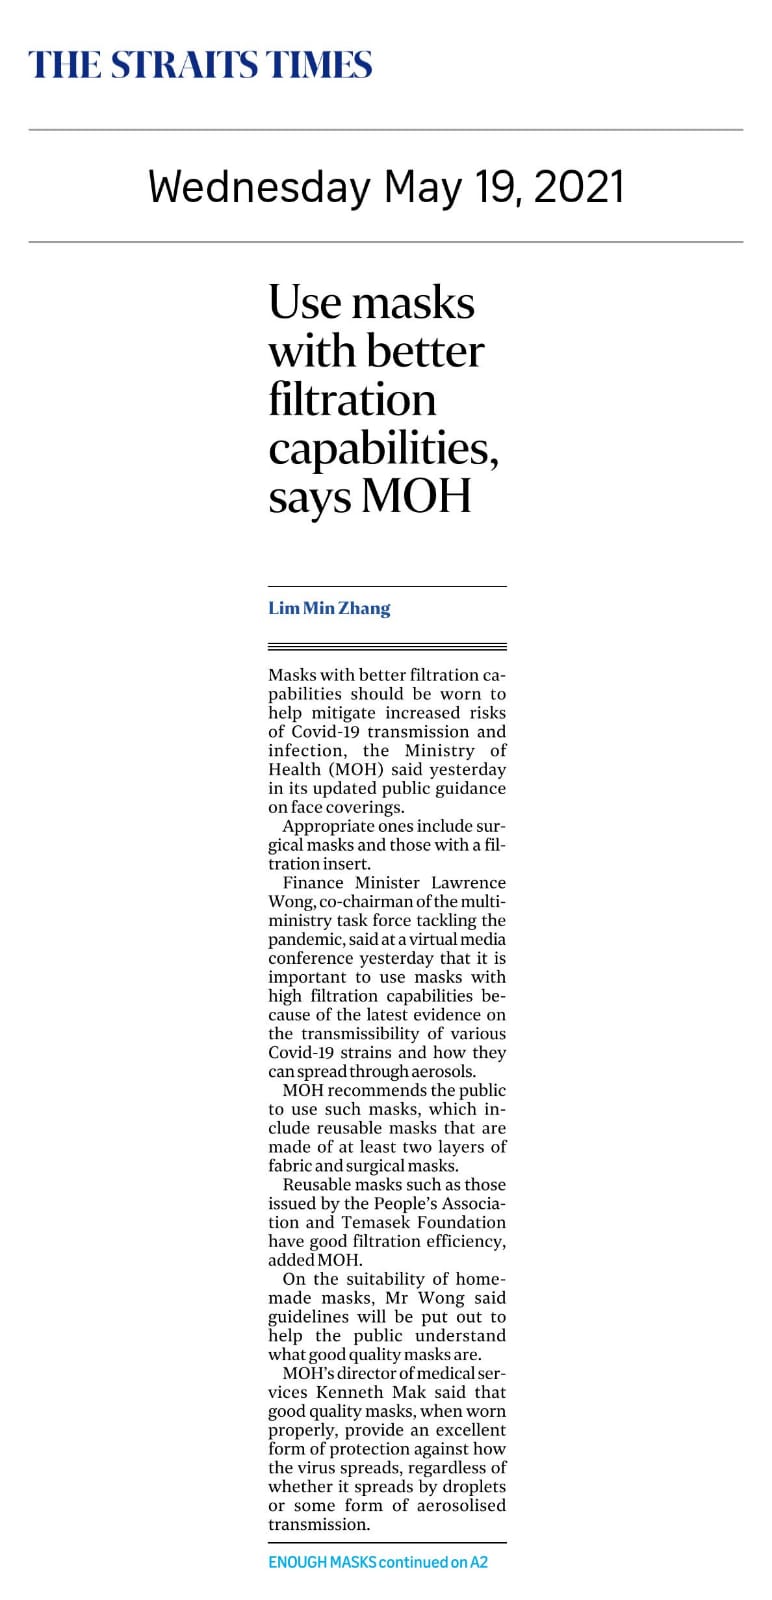 Use masks with better filtration capabilities, says MOH - Published in The Straits Times May 19, 2021